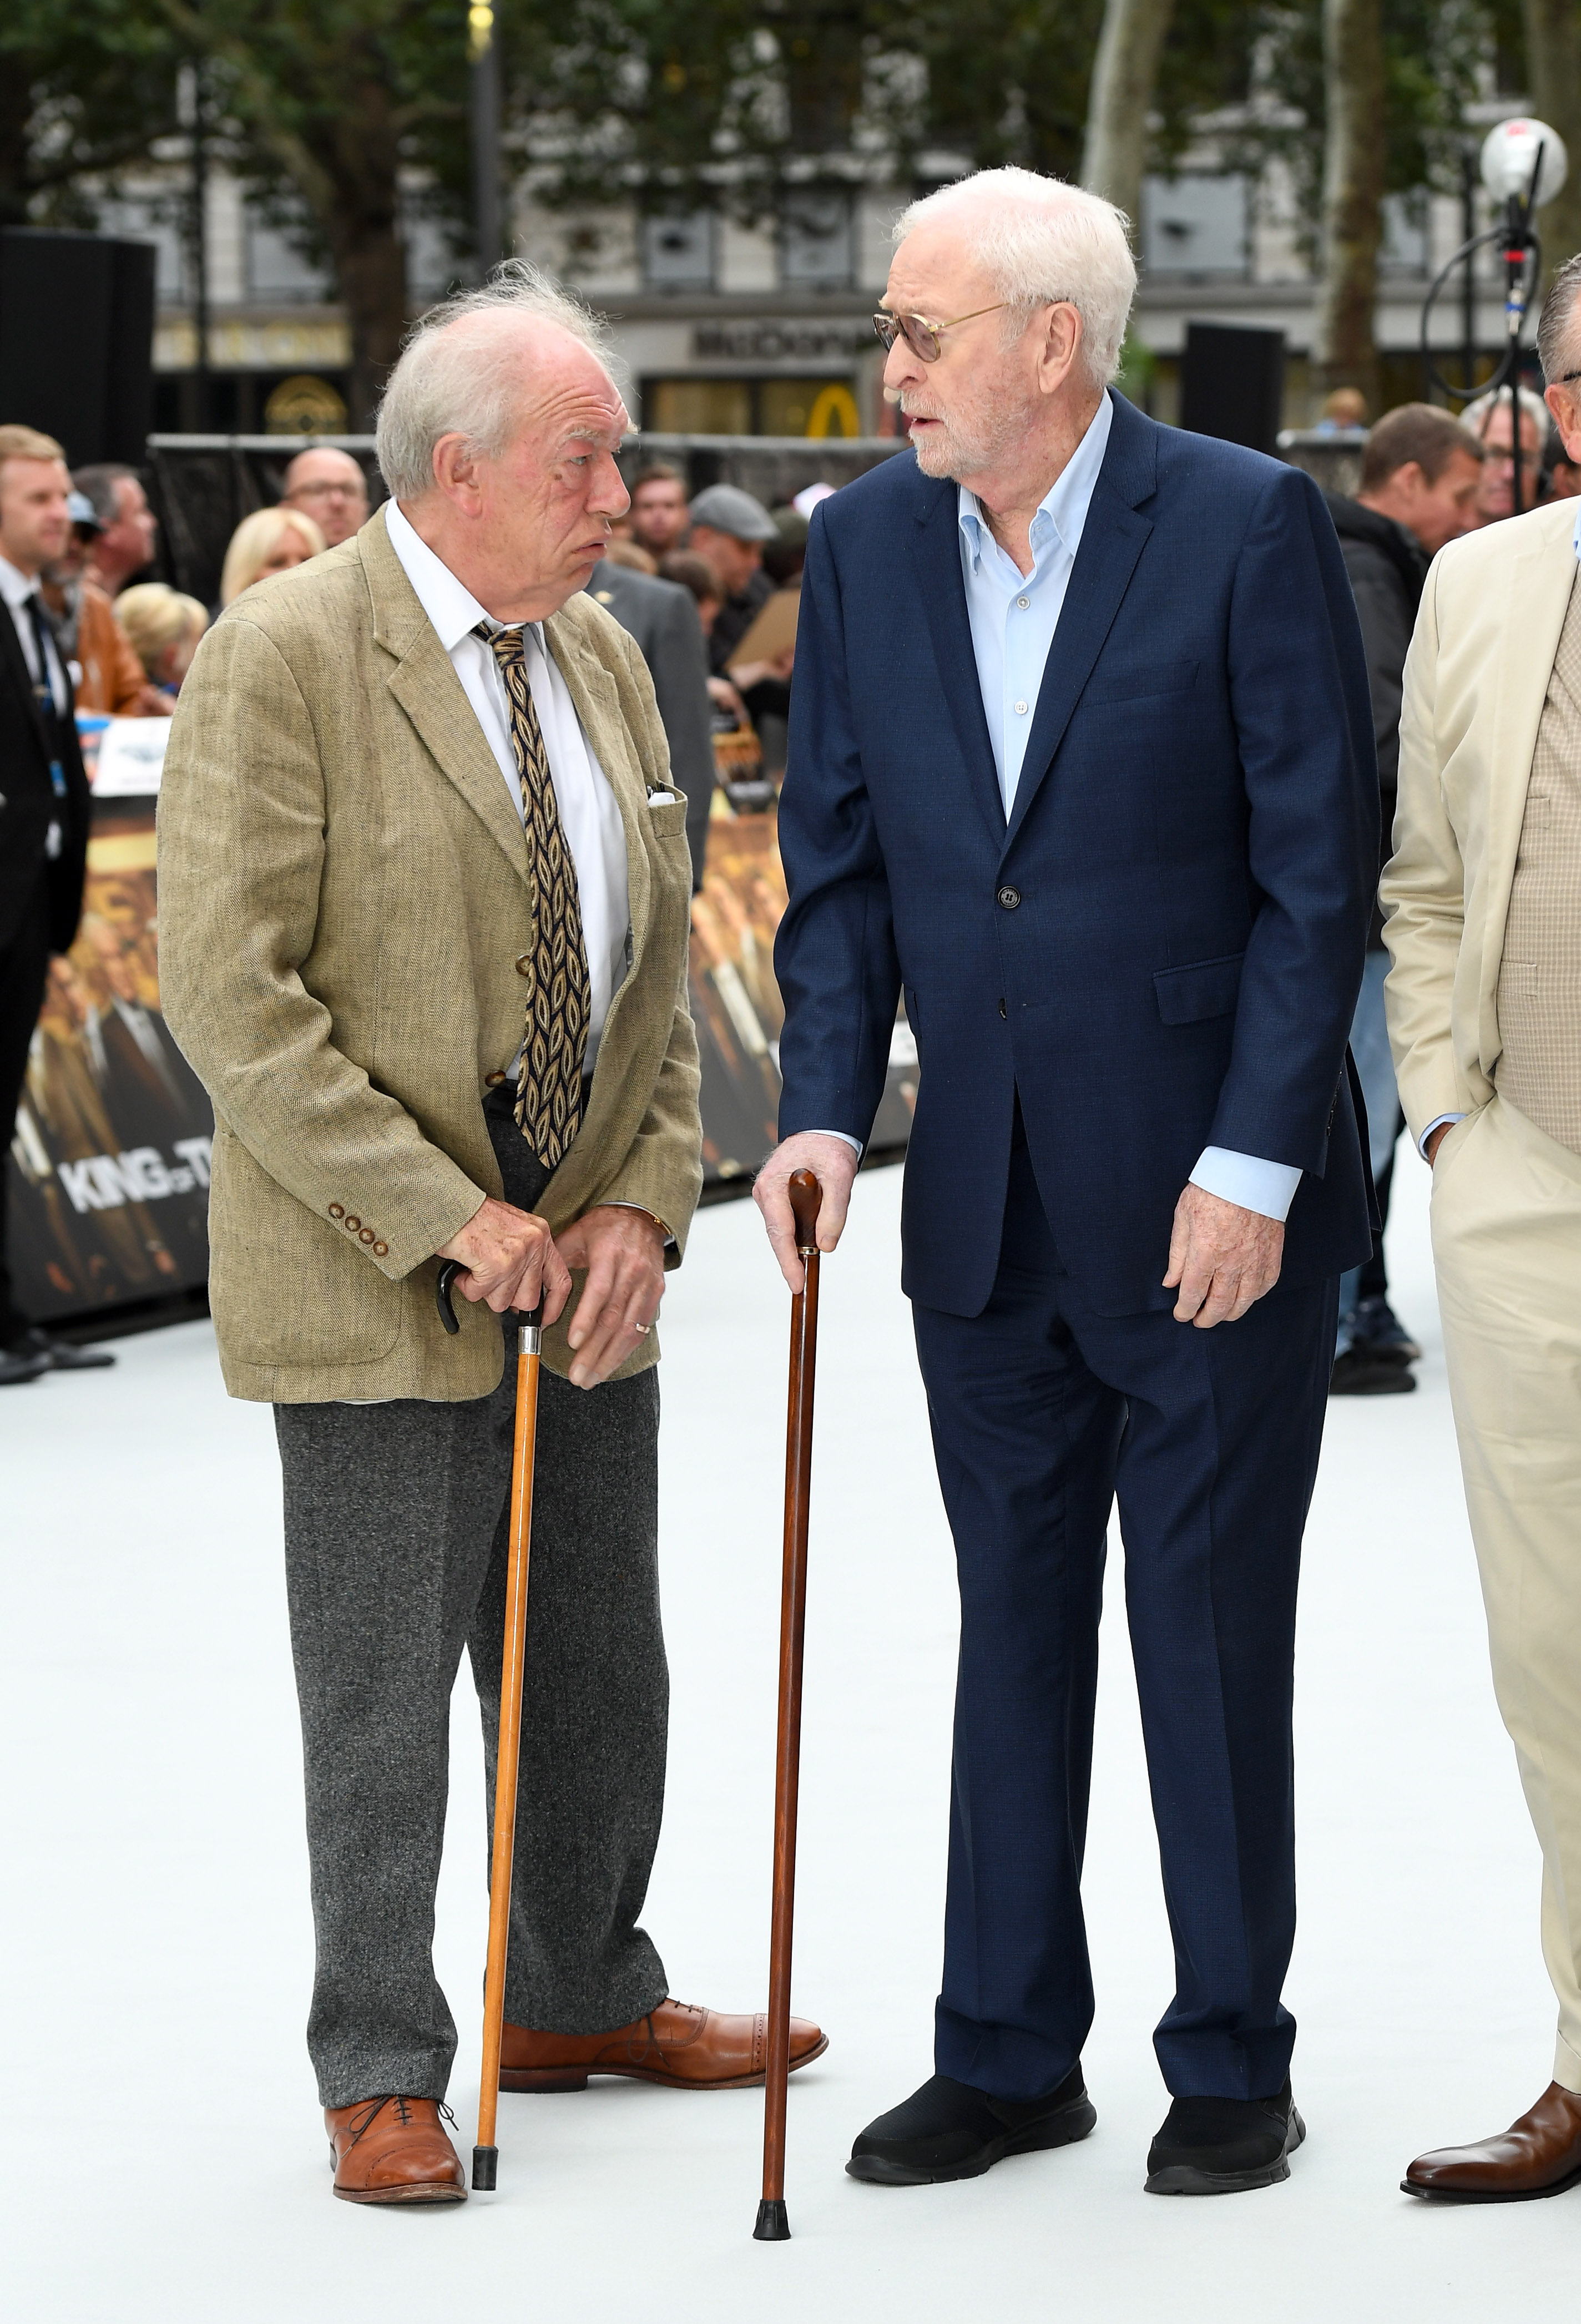 Sir Michael Caine and Sir Michael Gambon bei der Weltpremiere von "King Of Thieves" in London, England am 12. September 2018 | Quelle: Getty Images